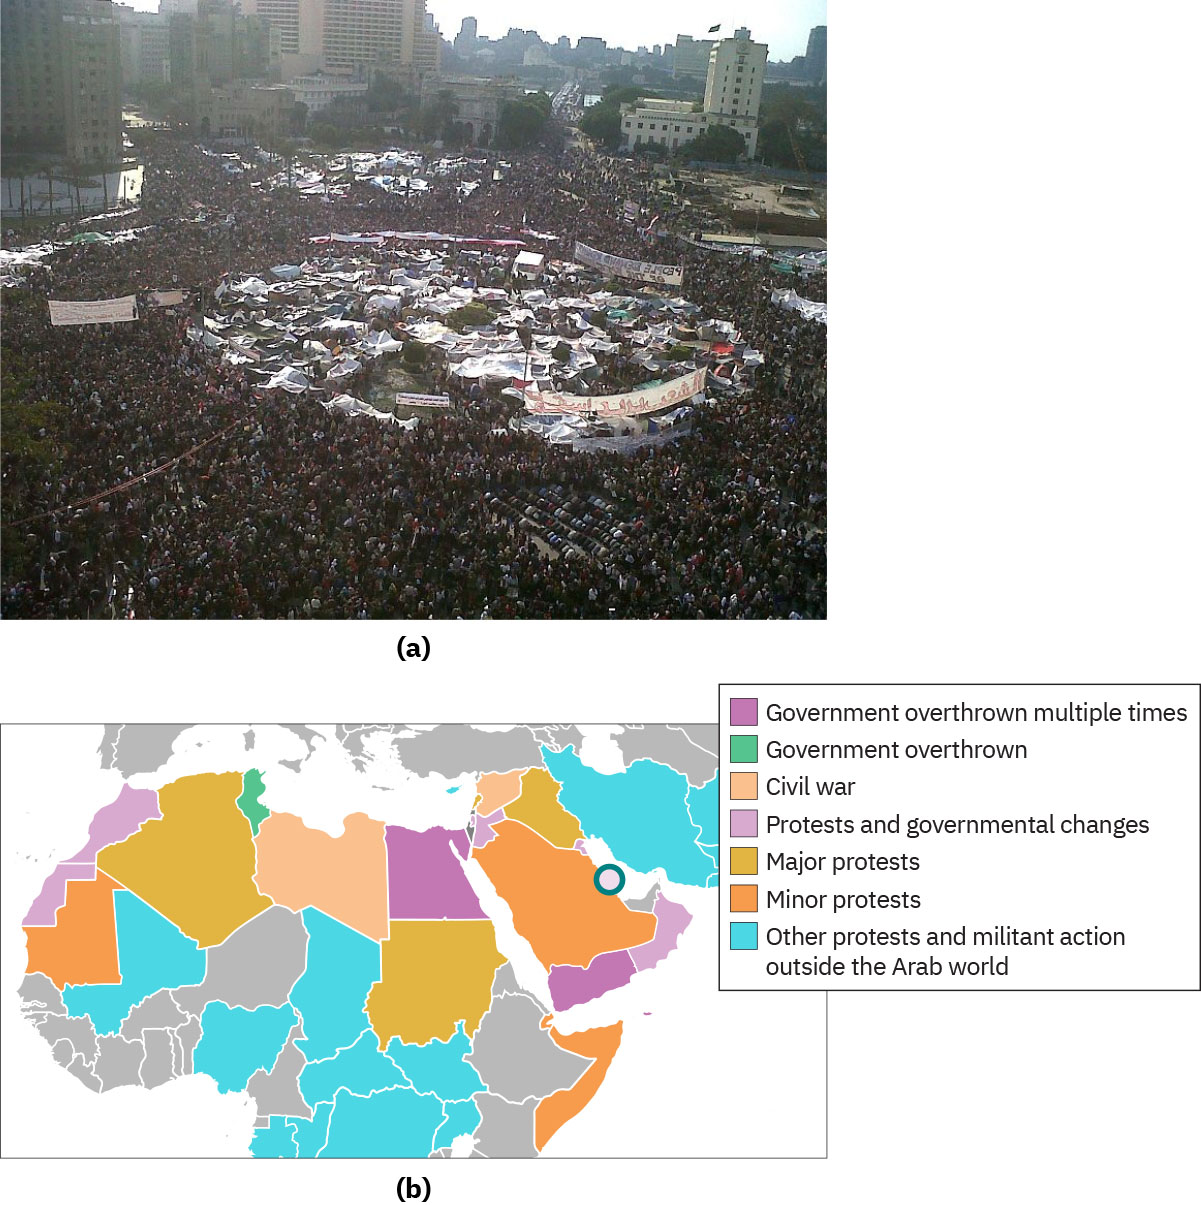 A picture and an image are shown. (a) A picture shows a large circular area in the middle of a large crowd of people filling every space. Inside the circular area are many white tents with people underneath. Banners surround the circular area with Egyptian writing. In front of the circular area there are six rows of people kneeling on the ground with their heads down. Another large tented circular area is shown behind the first area. In the background tall buildings and the sky can be seen. (b) A map of northern Africa and some of the Middle East is shown. Egypt and Yemen are highlighted purple to indicate “Government overthrown multiple times.” Tunisia is highlighted green to indicate “Government overthrown.” Libya and Syria are highlighted beige to indicate “Civil war.” Morocco, Western Sahara, Oman, Jordan, and Kuwait are highlighted pink to indicate “Protests and governmental changes.” Algeria, Sudan, and Iraq are highlighted yellow to indicate “Major protests.” Mauritania, Somalia, and Saudi Arabia are highlighted orange to indicate “Minor protests.” Mali, Nigeria, Chad, Central African Republic, South Sudan, Gabon, Congo, Democratic Republic of the Congo, Uganda, Iran, Afghanistan, and Pakistan are highlighted blue to indicate “Other protests and militant action outside the Arab world.” All other parts of the map are gray and the water is white. There is a thick, dark green circle drawn on the map on the eastern shore of Saudi Arabia.